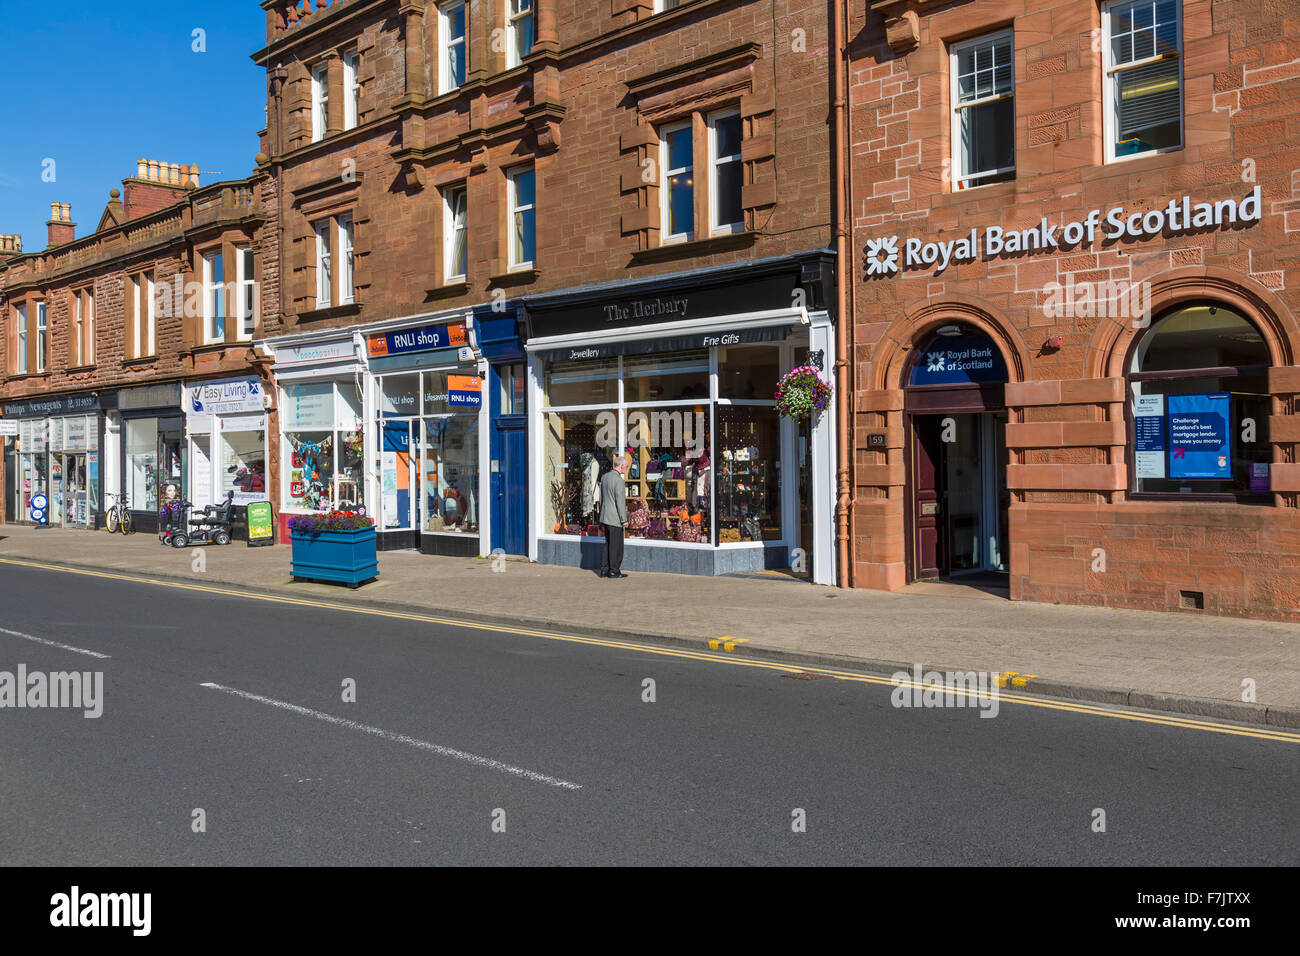 This Royal Bank of Scotland branch is permanently closed. Seaside town of Troon in Ayrshire, Scotland, UK Stock Photo